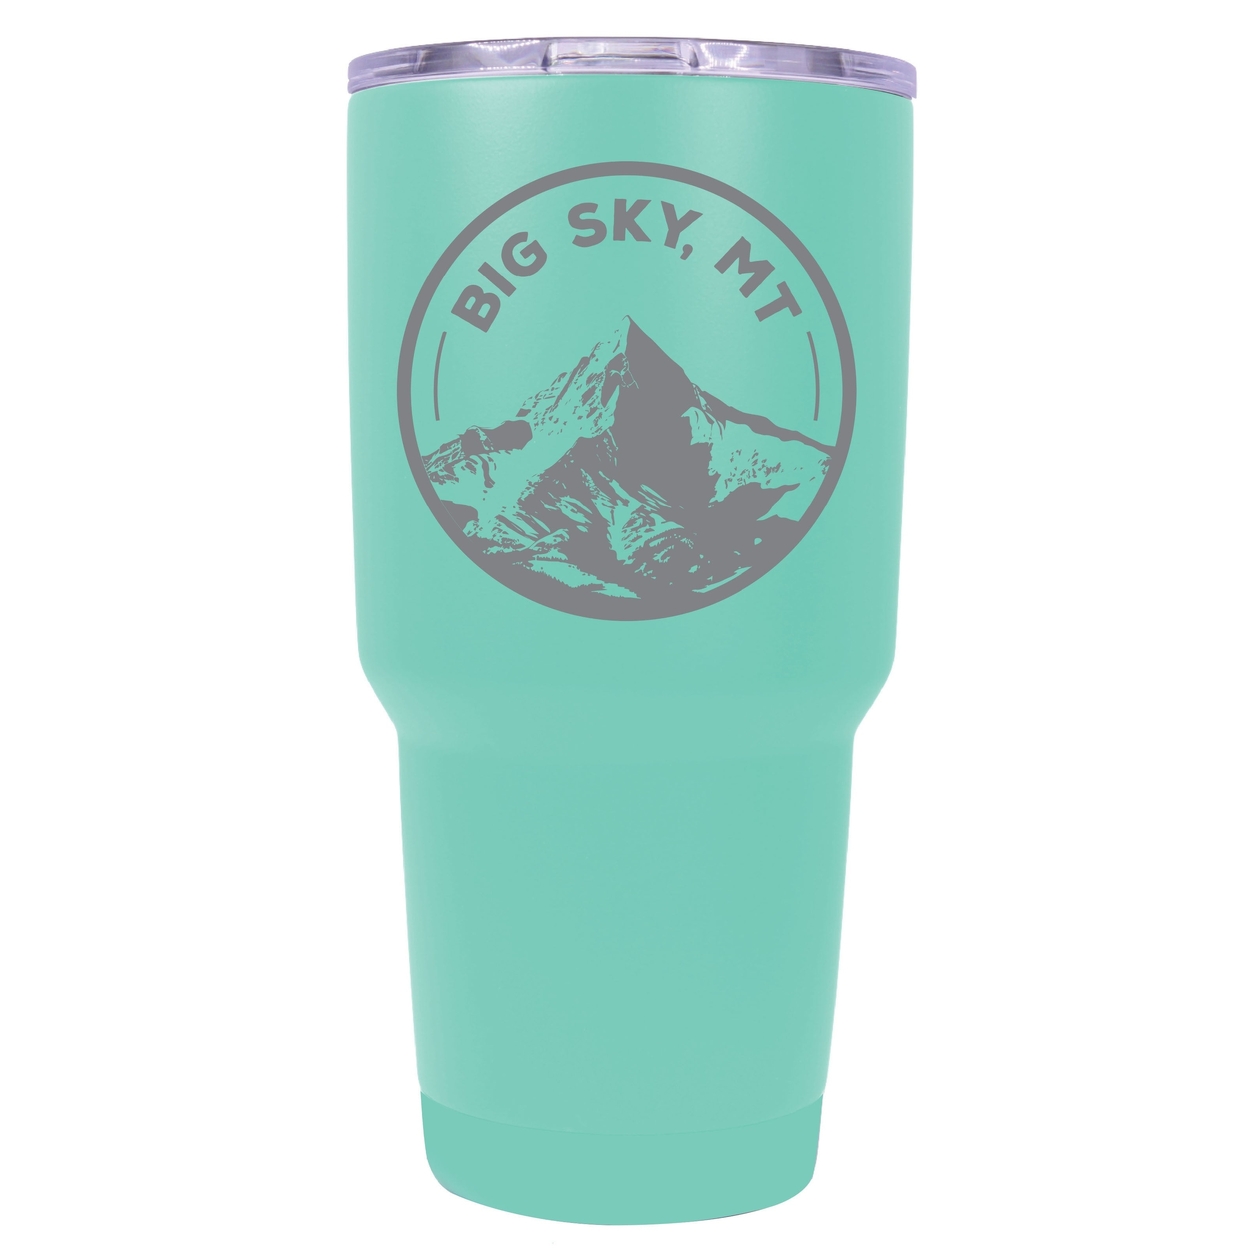 Big Sky Montana Souvenir 24 Oz Engraved Insulated Stainless Steel Tumbler - Red,,2-Pack